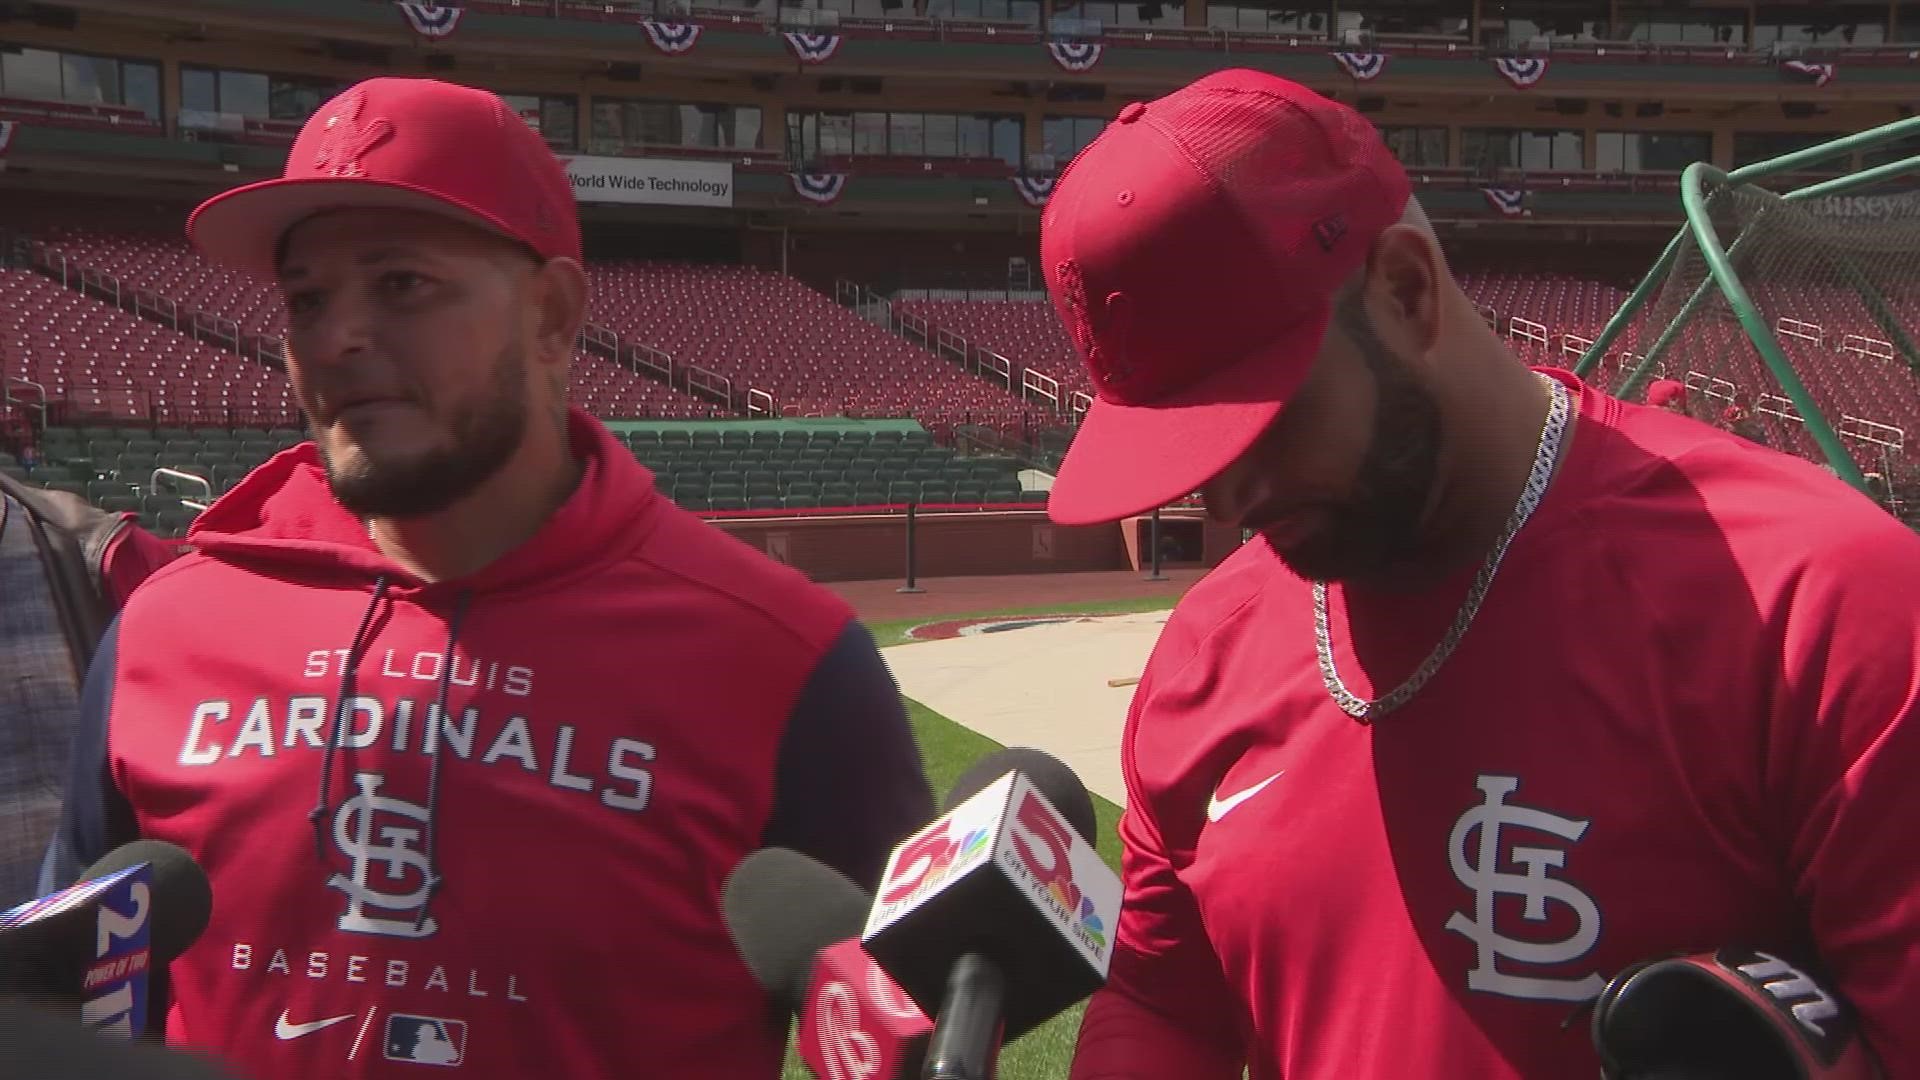 The future hall of fame pair had some fun the day before opening day back with the Cardinals.